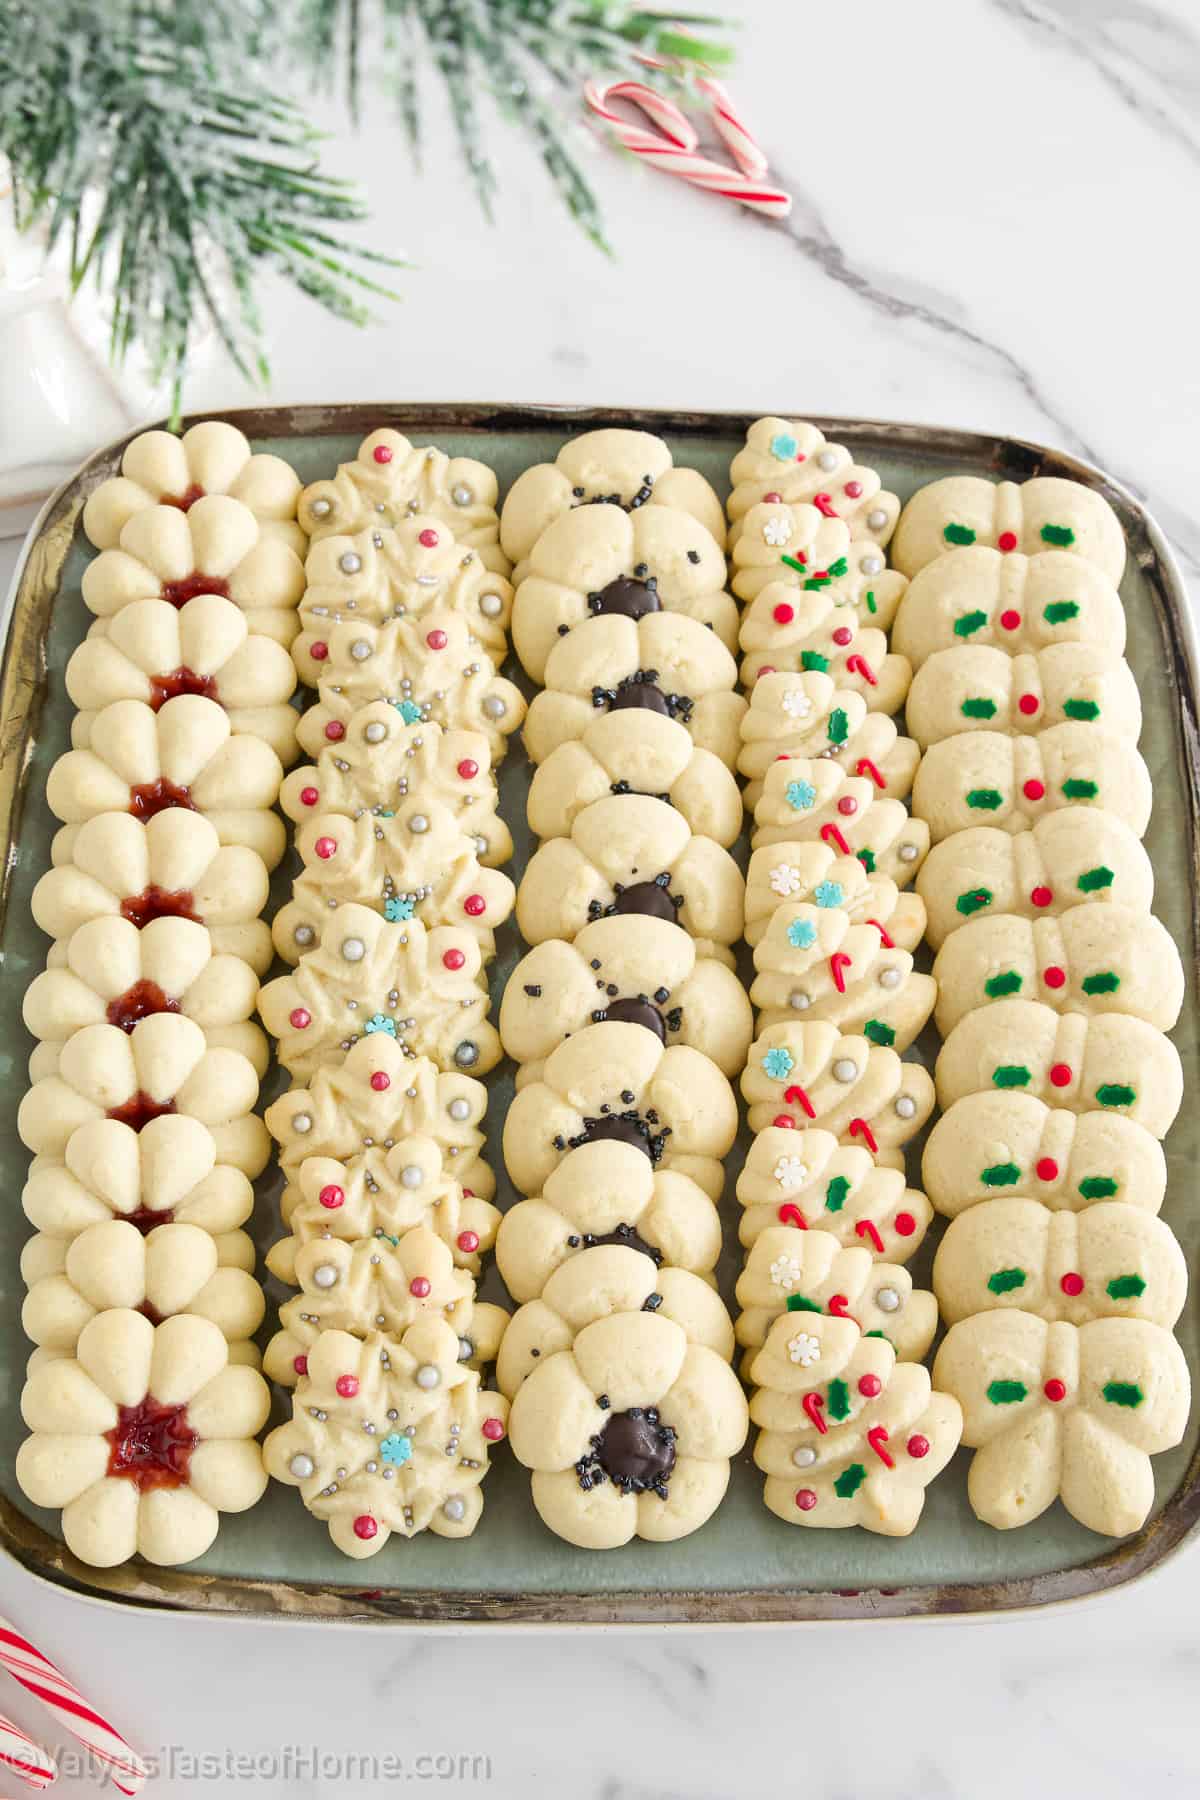 This Christmas Cookies recipe (Spritz Cookies) will give you classic and delicious flavors easily at home! With festive shapes and decor these are bound to win everyone's heart!